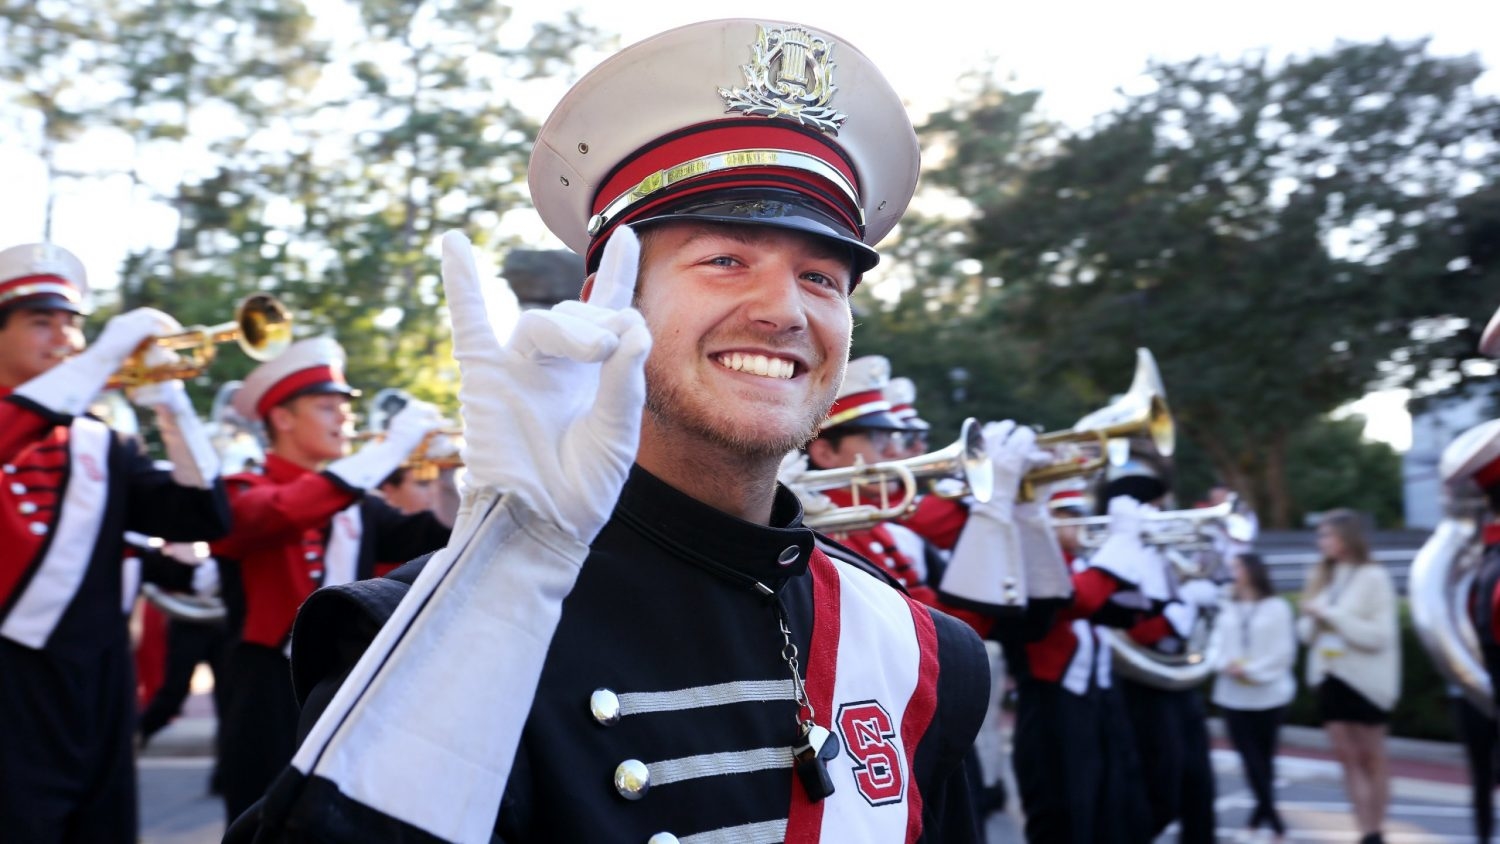 Thomas Peters smiles and does the wolfie in his band uniform